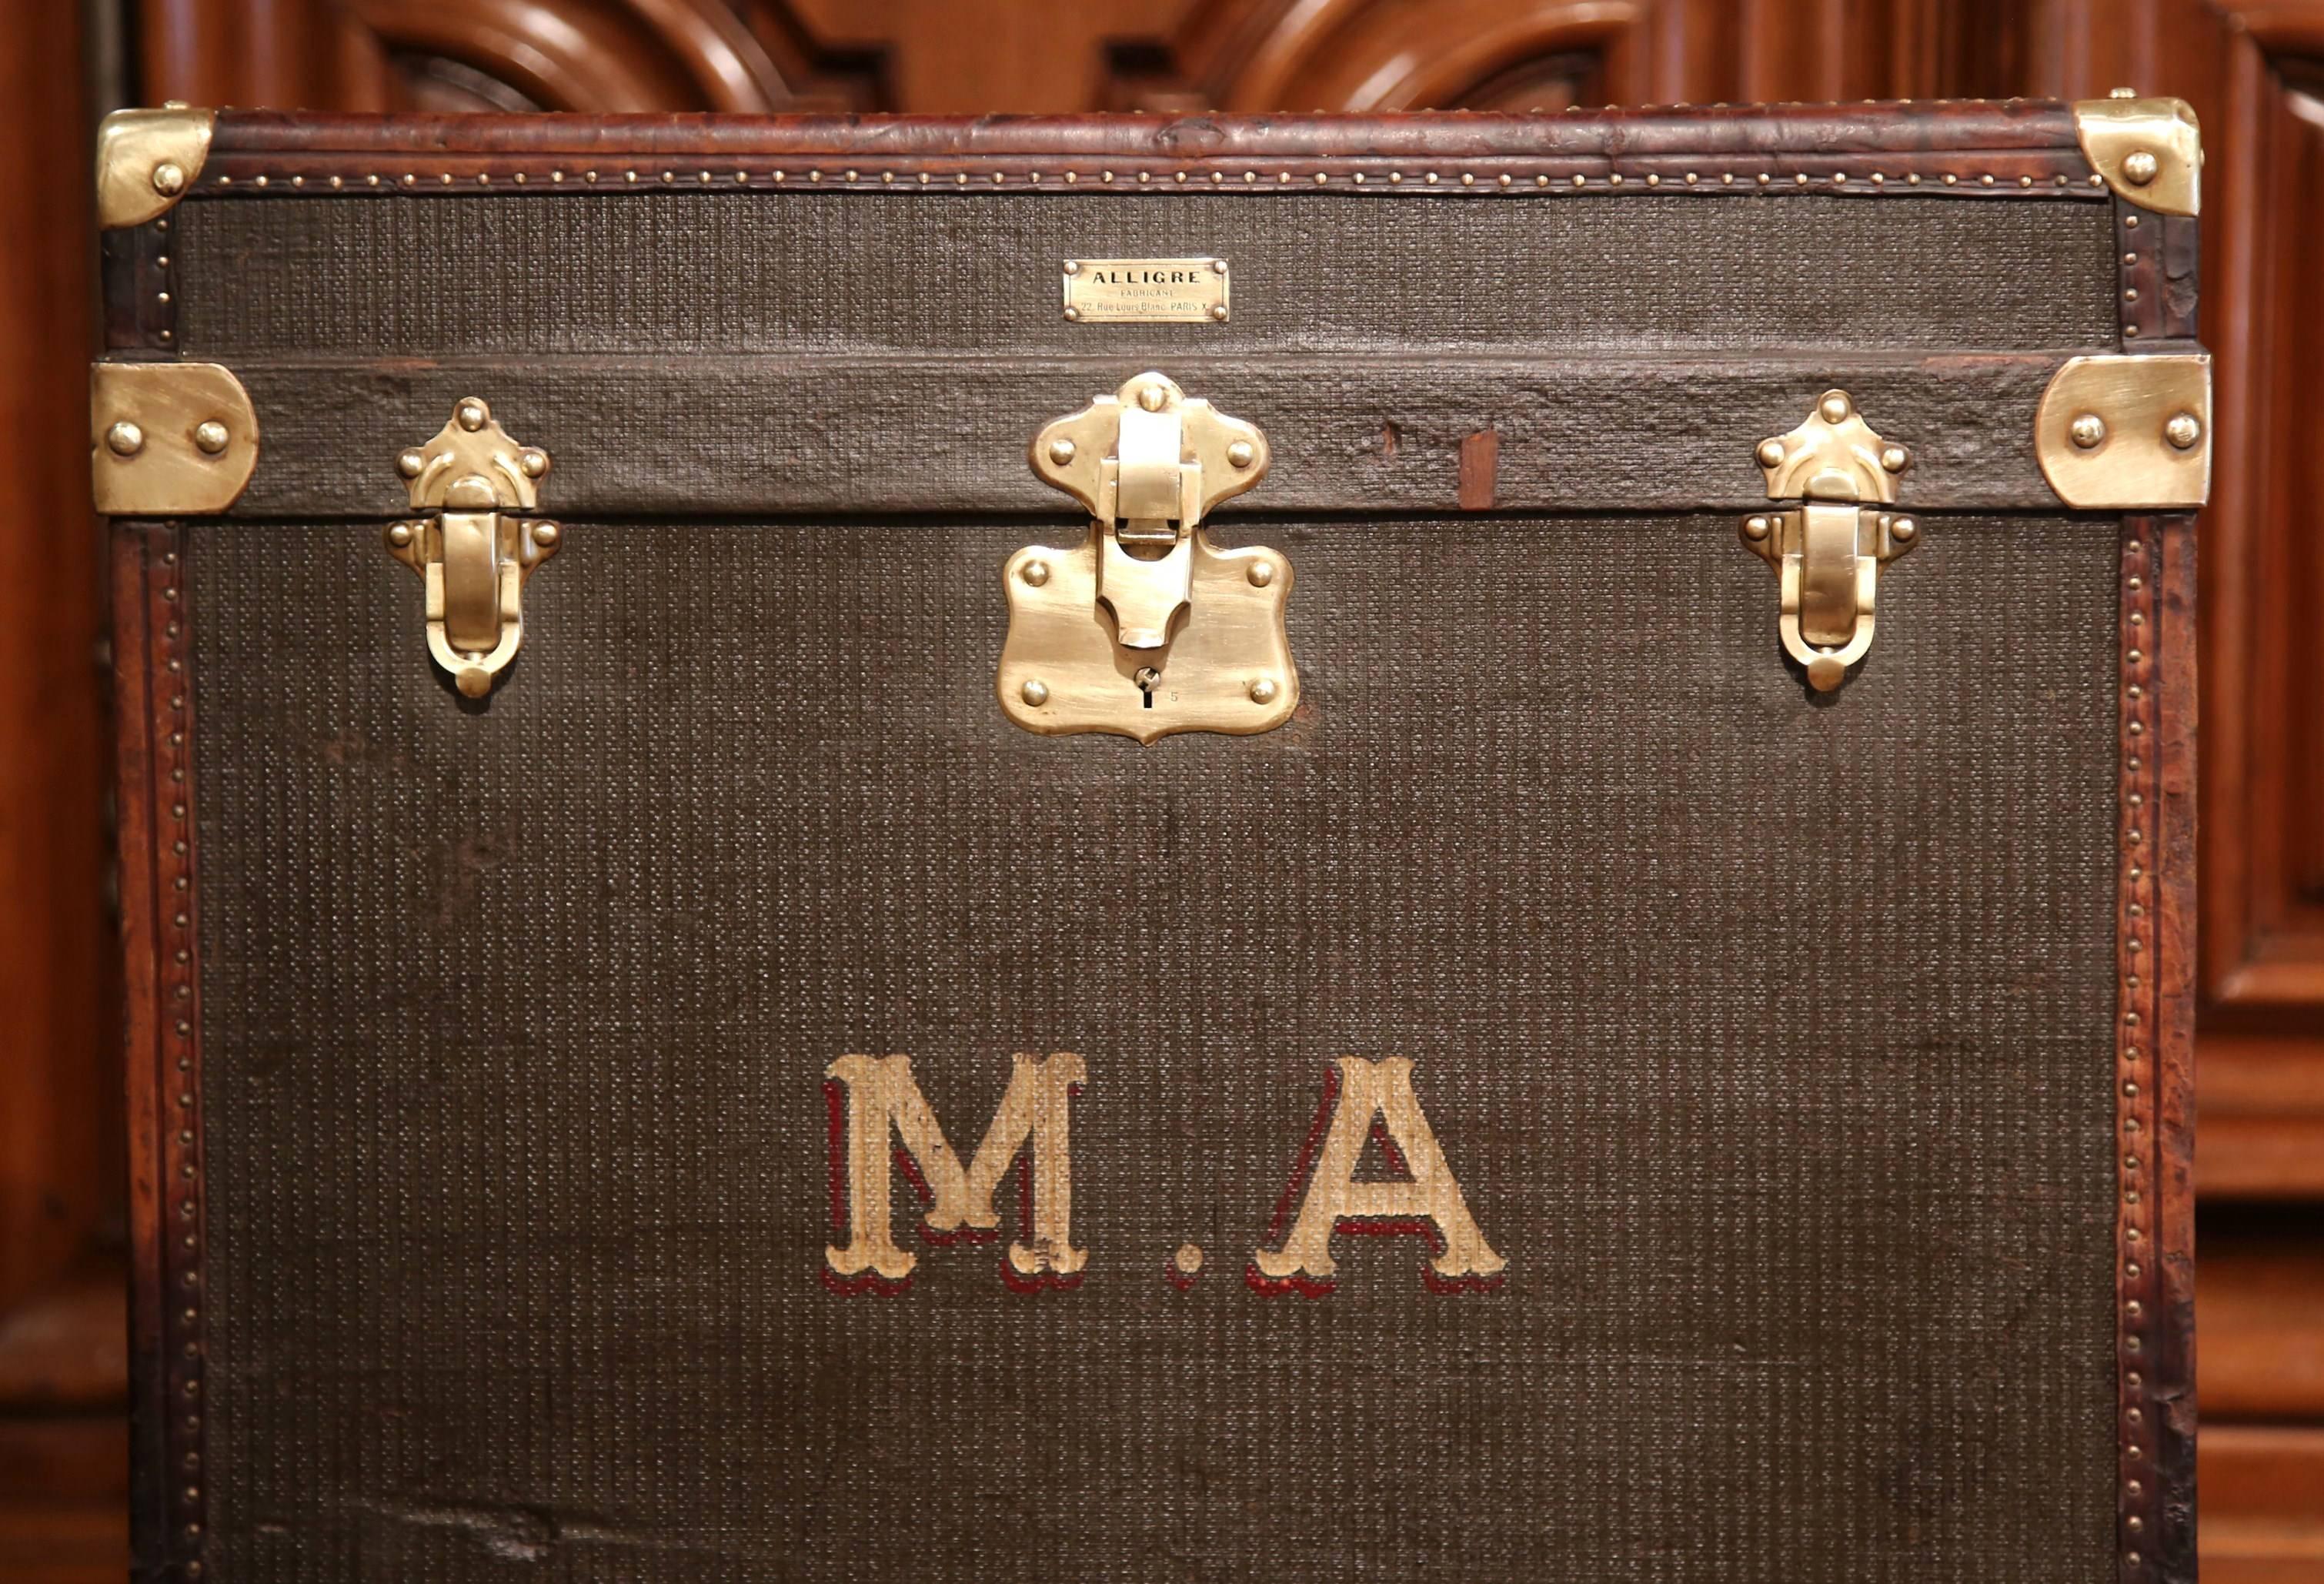 Almost square in shape, this leather trunk was crafted in Paris, France, circa 1860. The piece features brass mounts on the corners with the initials MA. The inside has been reupholstered with new fabric and two bags of fresh lavender. The trunk,